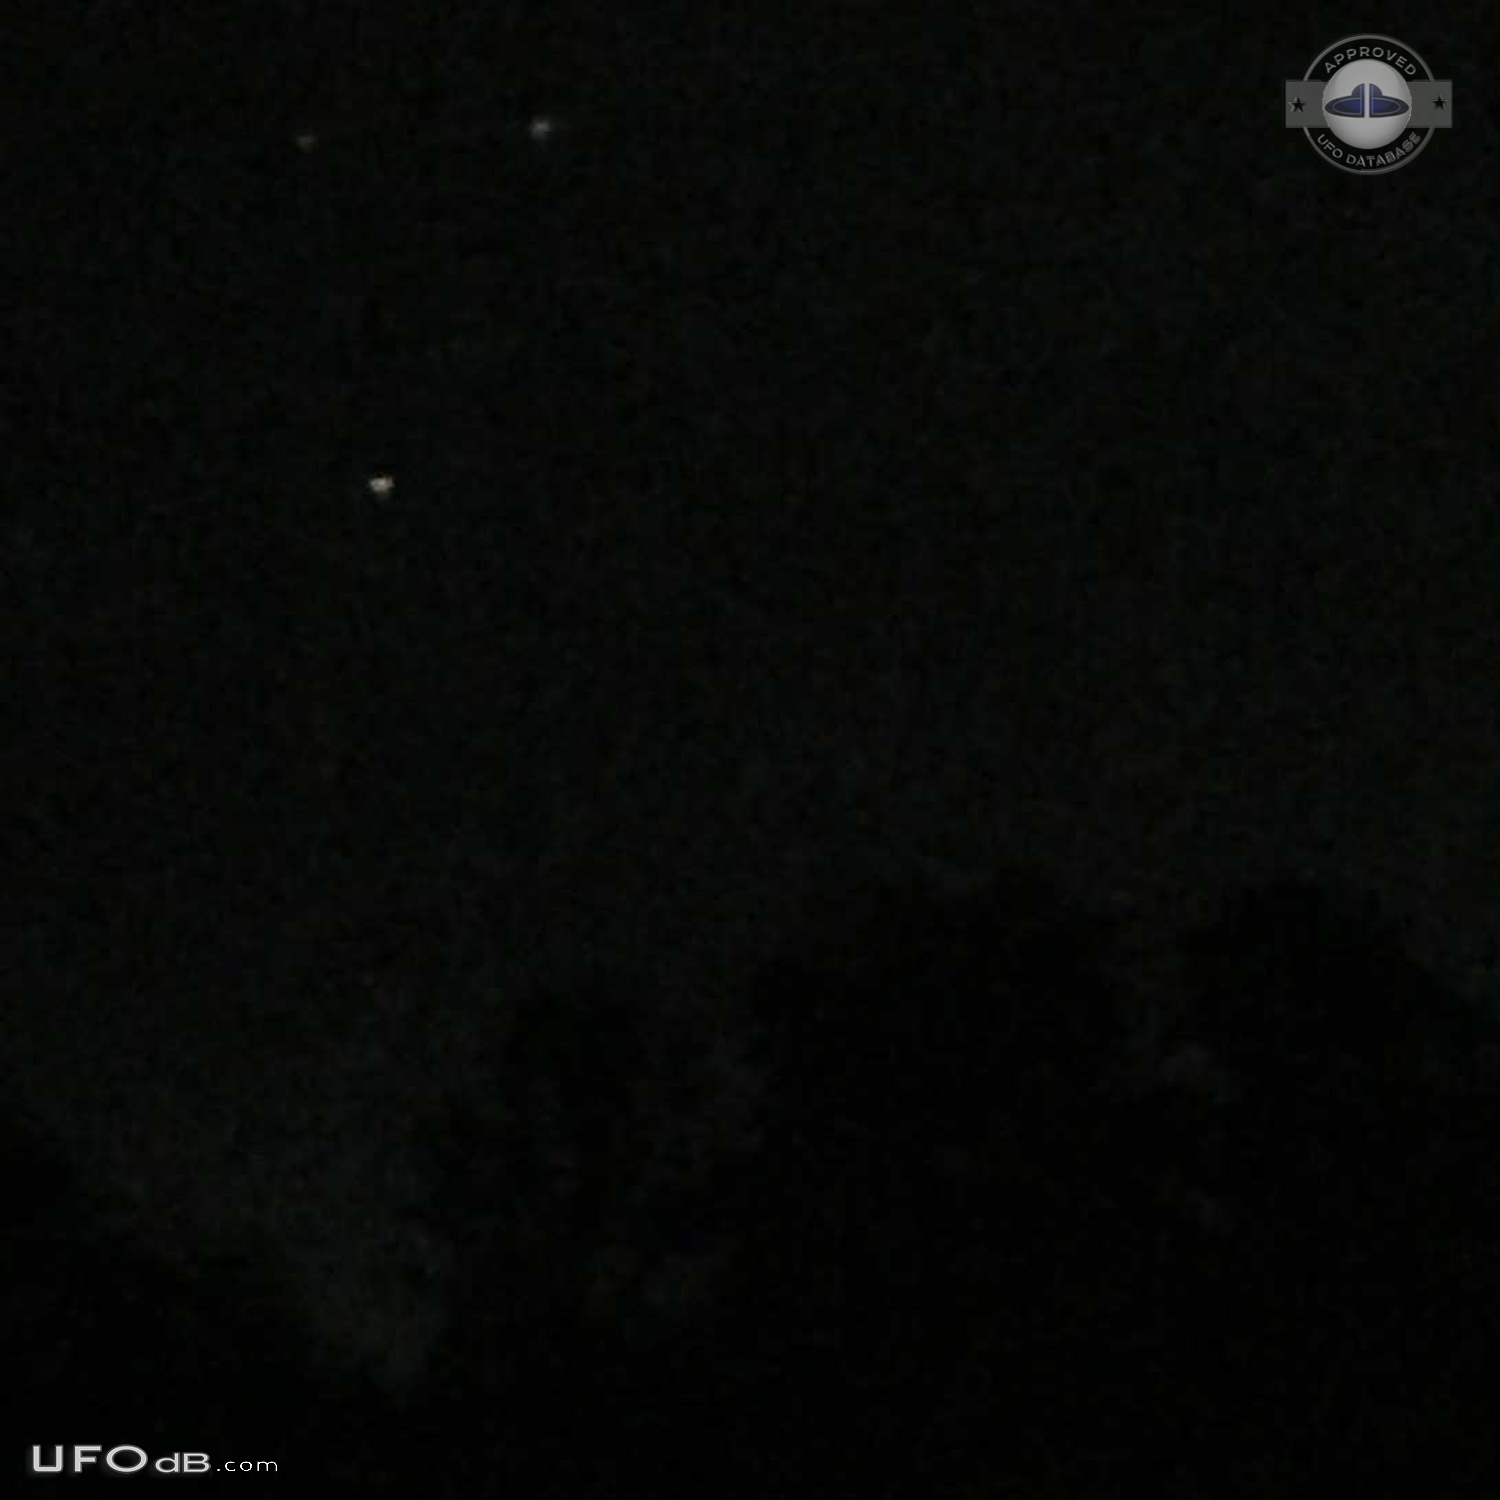 Three slowly moving UFOs in shape of inverted triangle Alabama 2016 UFO Picture #774-5